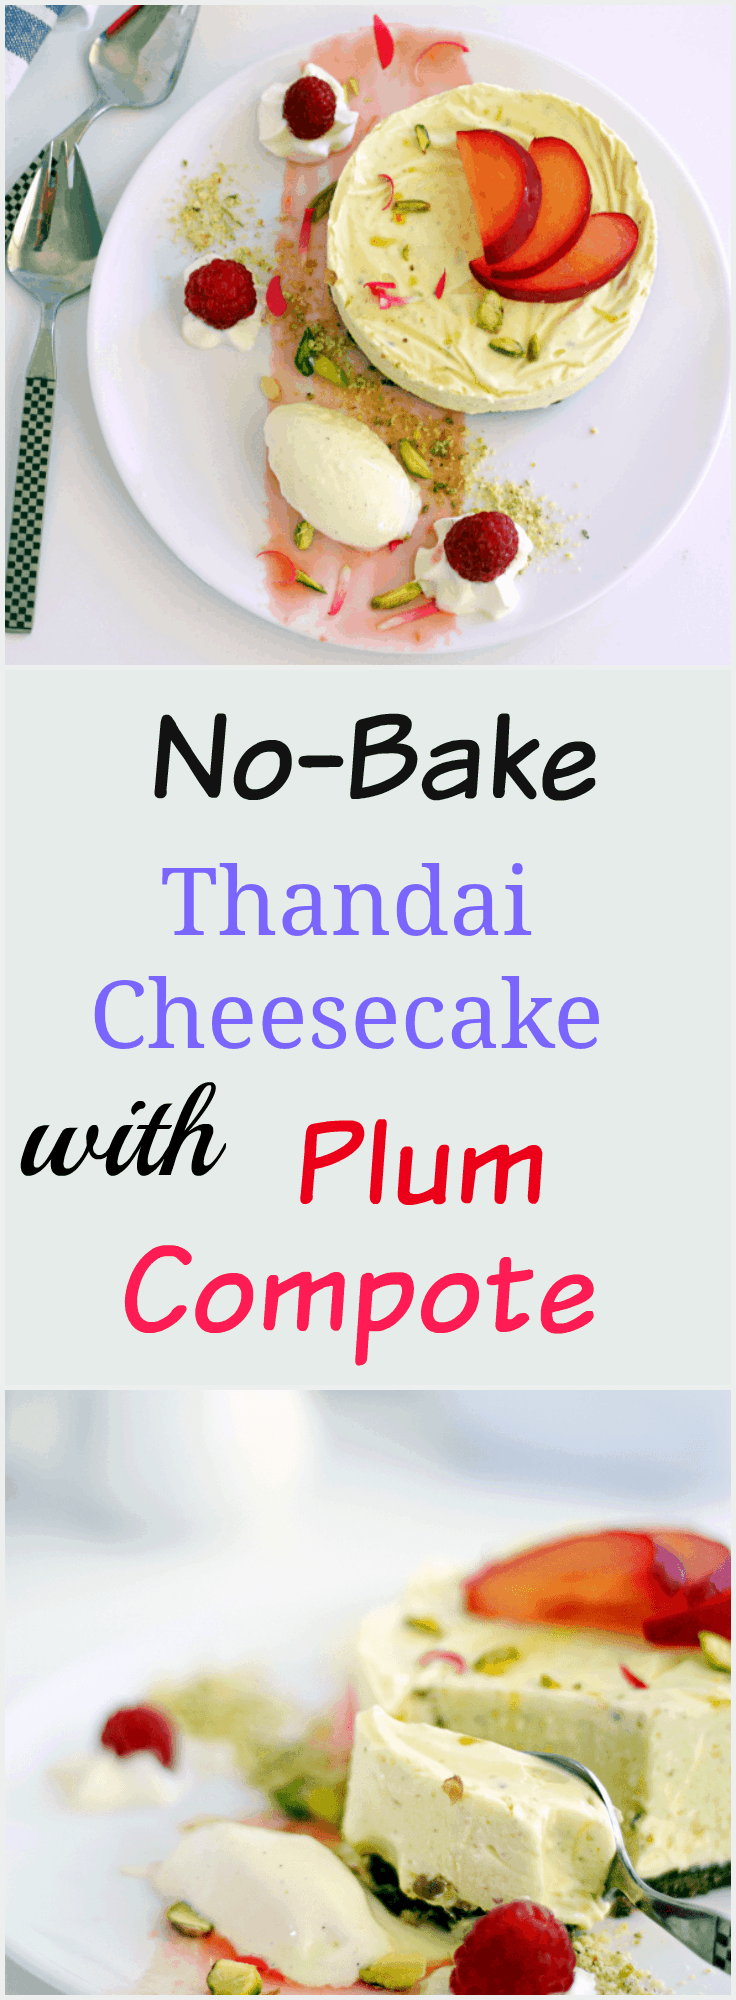 no-bake-thandai-cheesecake-with-plum-compote fusion dessert for holi using thandai masala indian dessert indian sweet